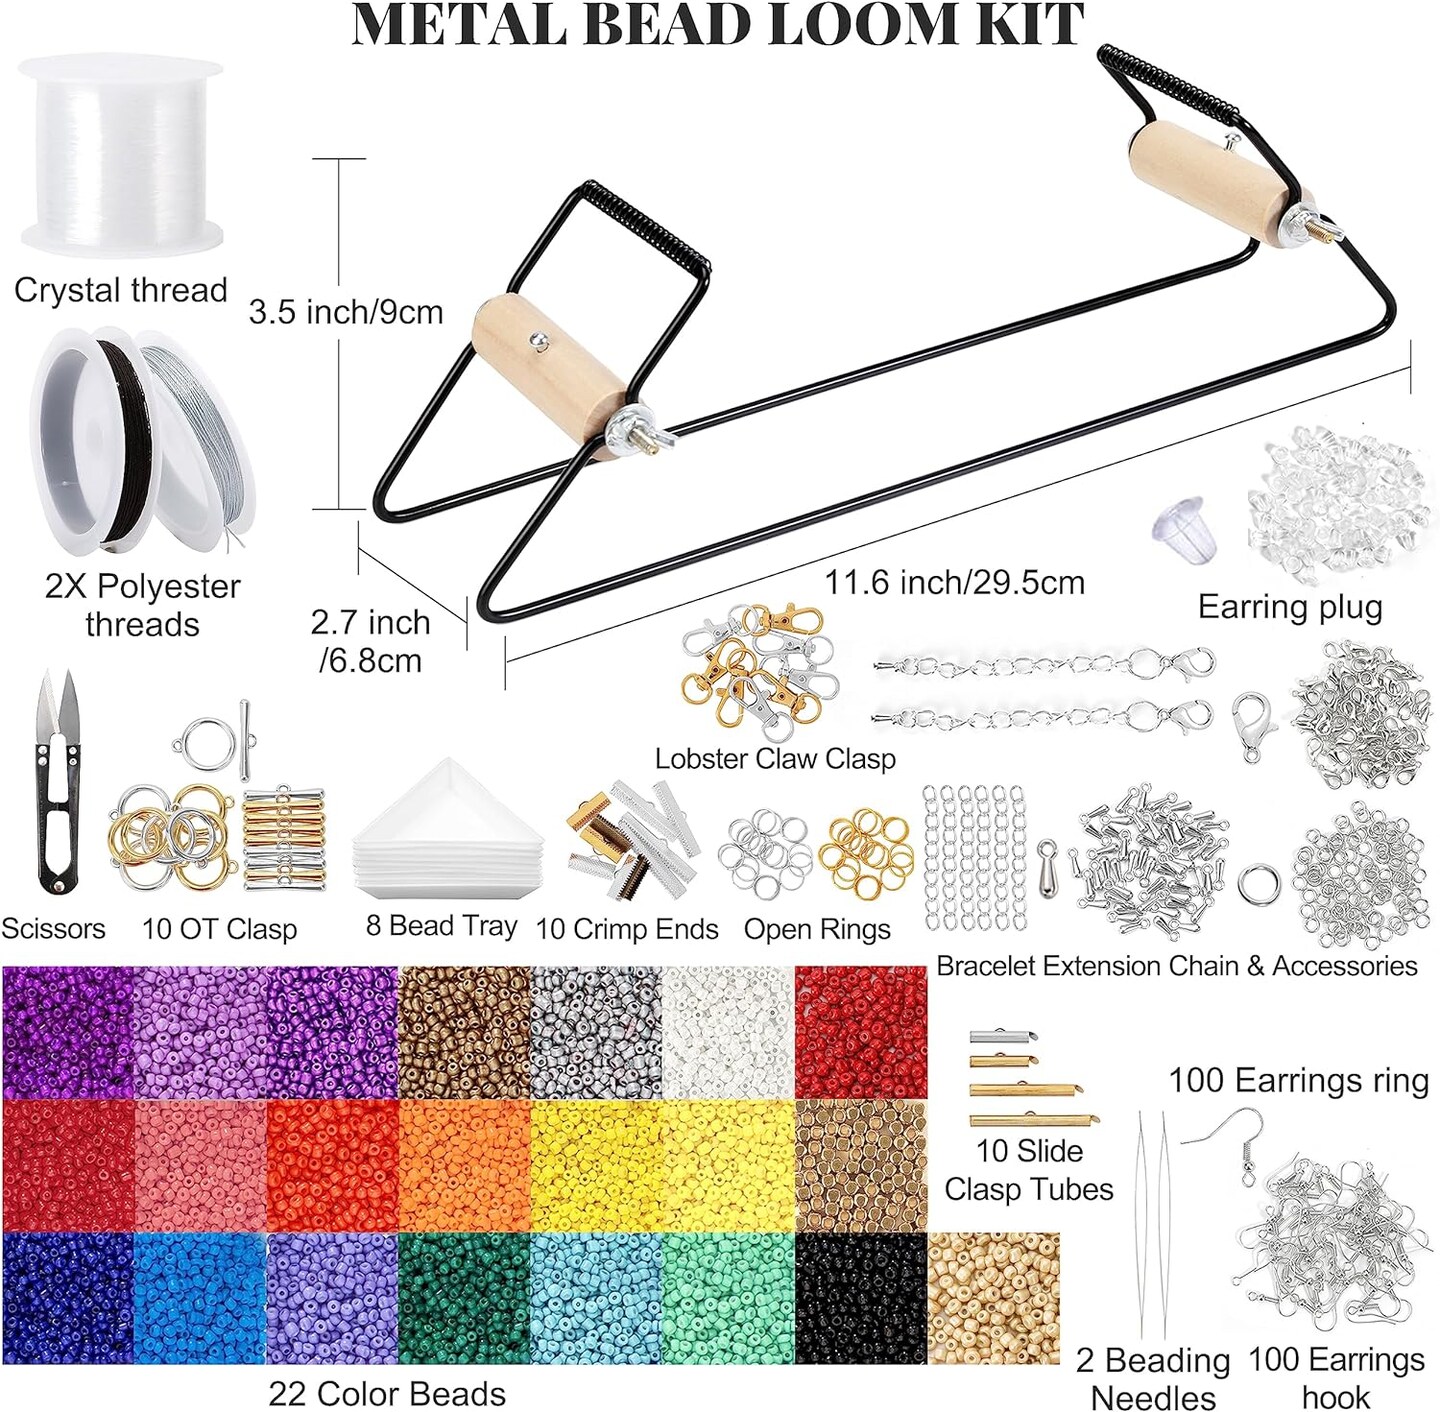 Value Bead Loom Kit, 11343 PCS Loom Beading Supplies with Lots of Seed Beads, Complete Jewelry Making Tools and Accessories, Beading Loom Kits for Adults Jewelry Making Bracelets Belts